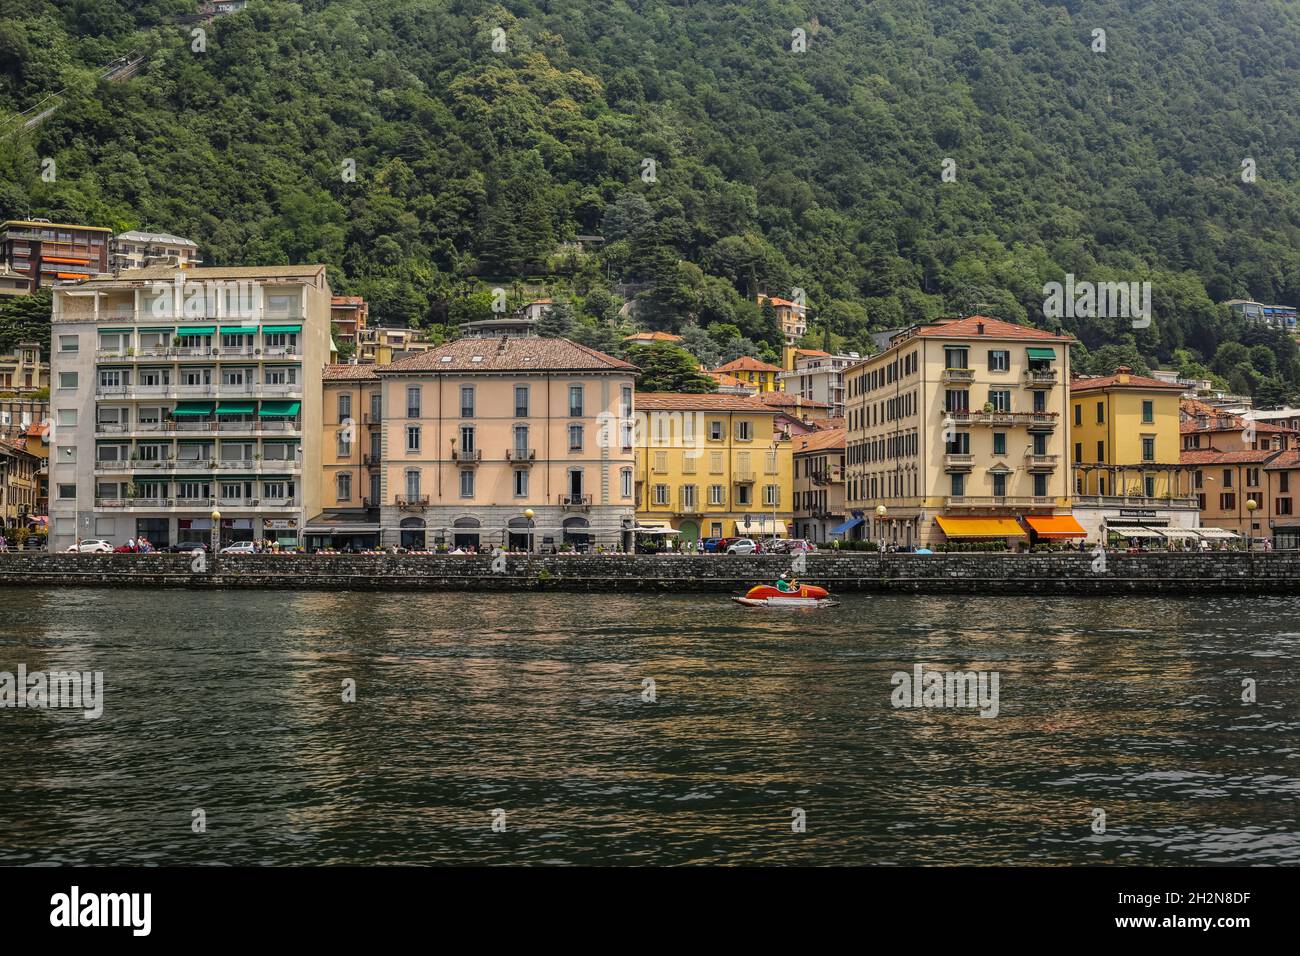 Como, Italy - June 15, 2017: View of Traditional Colorful Buildings by the Lake on a Cloudy Day Stock Photo